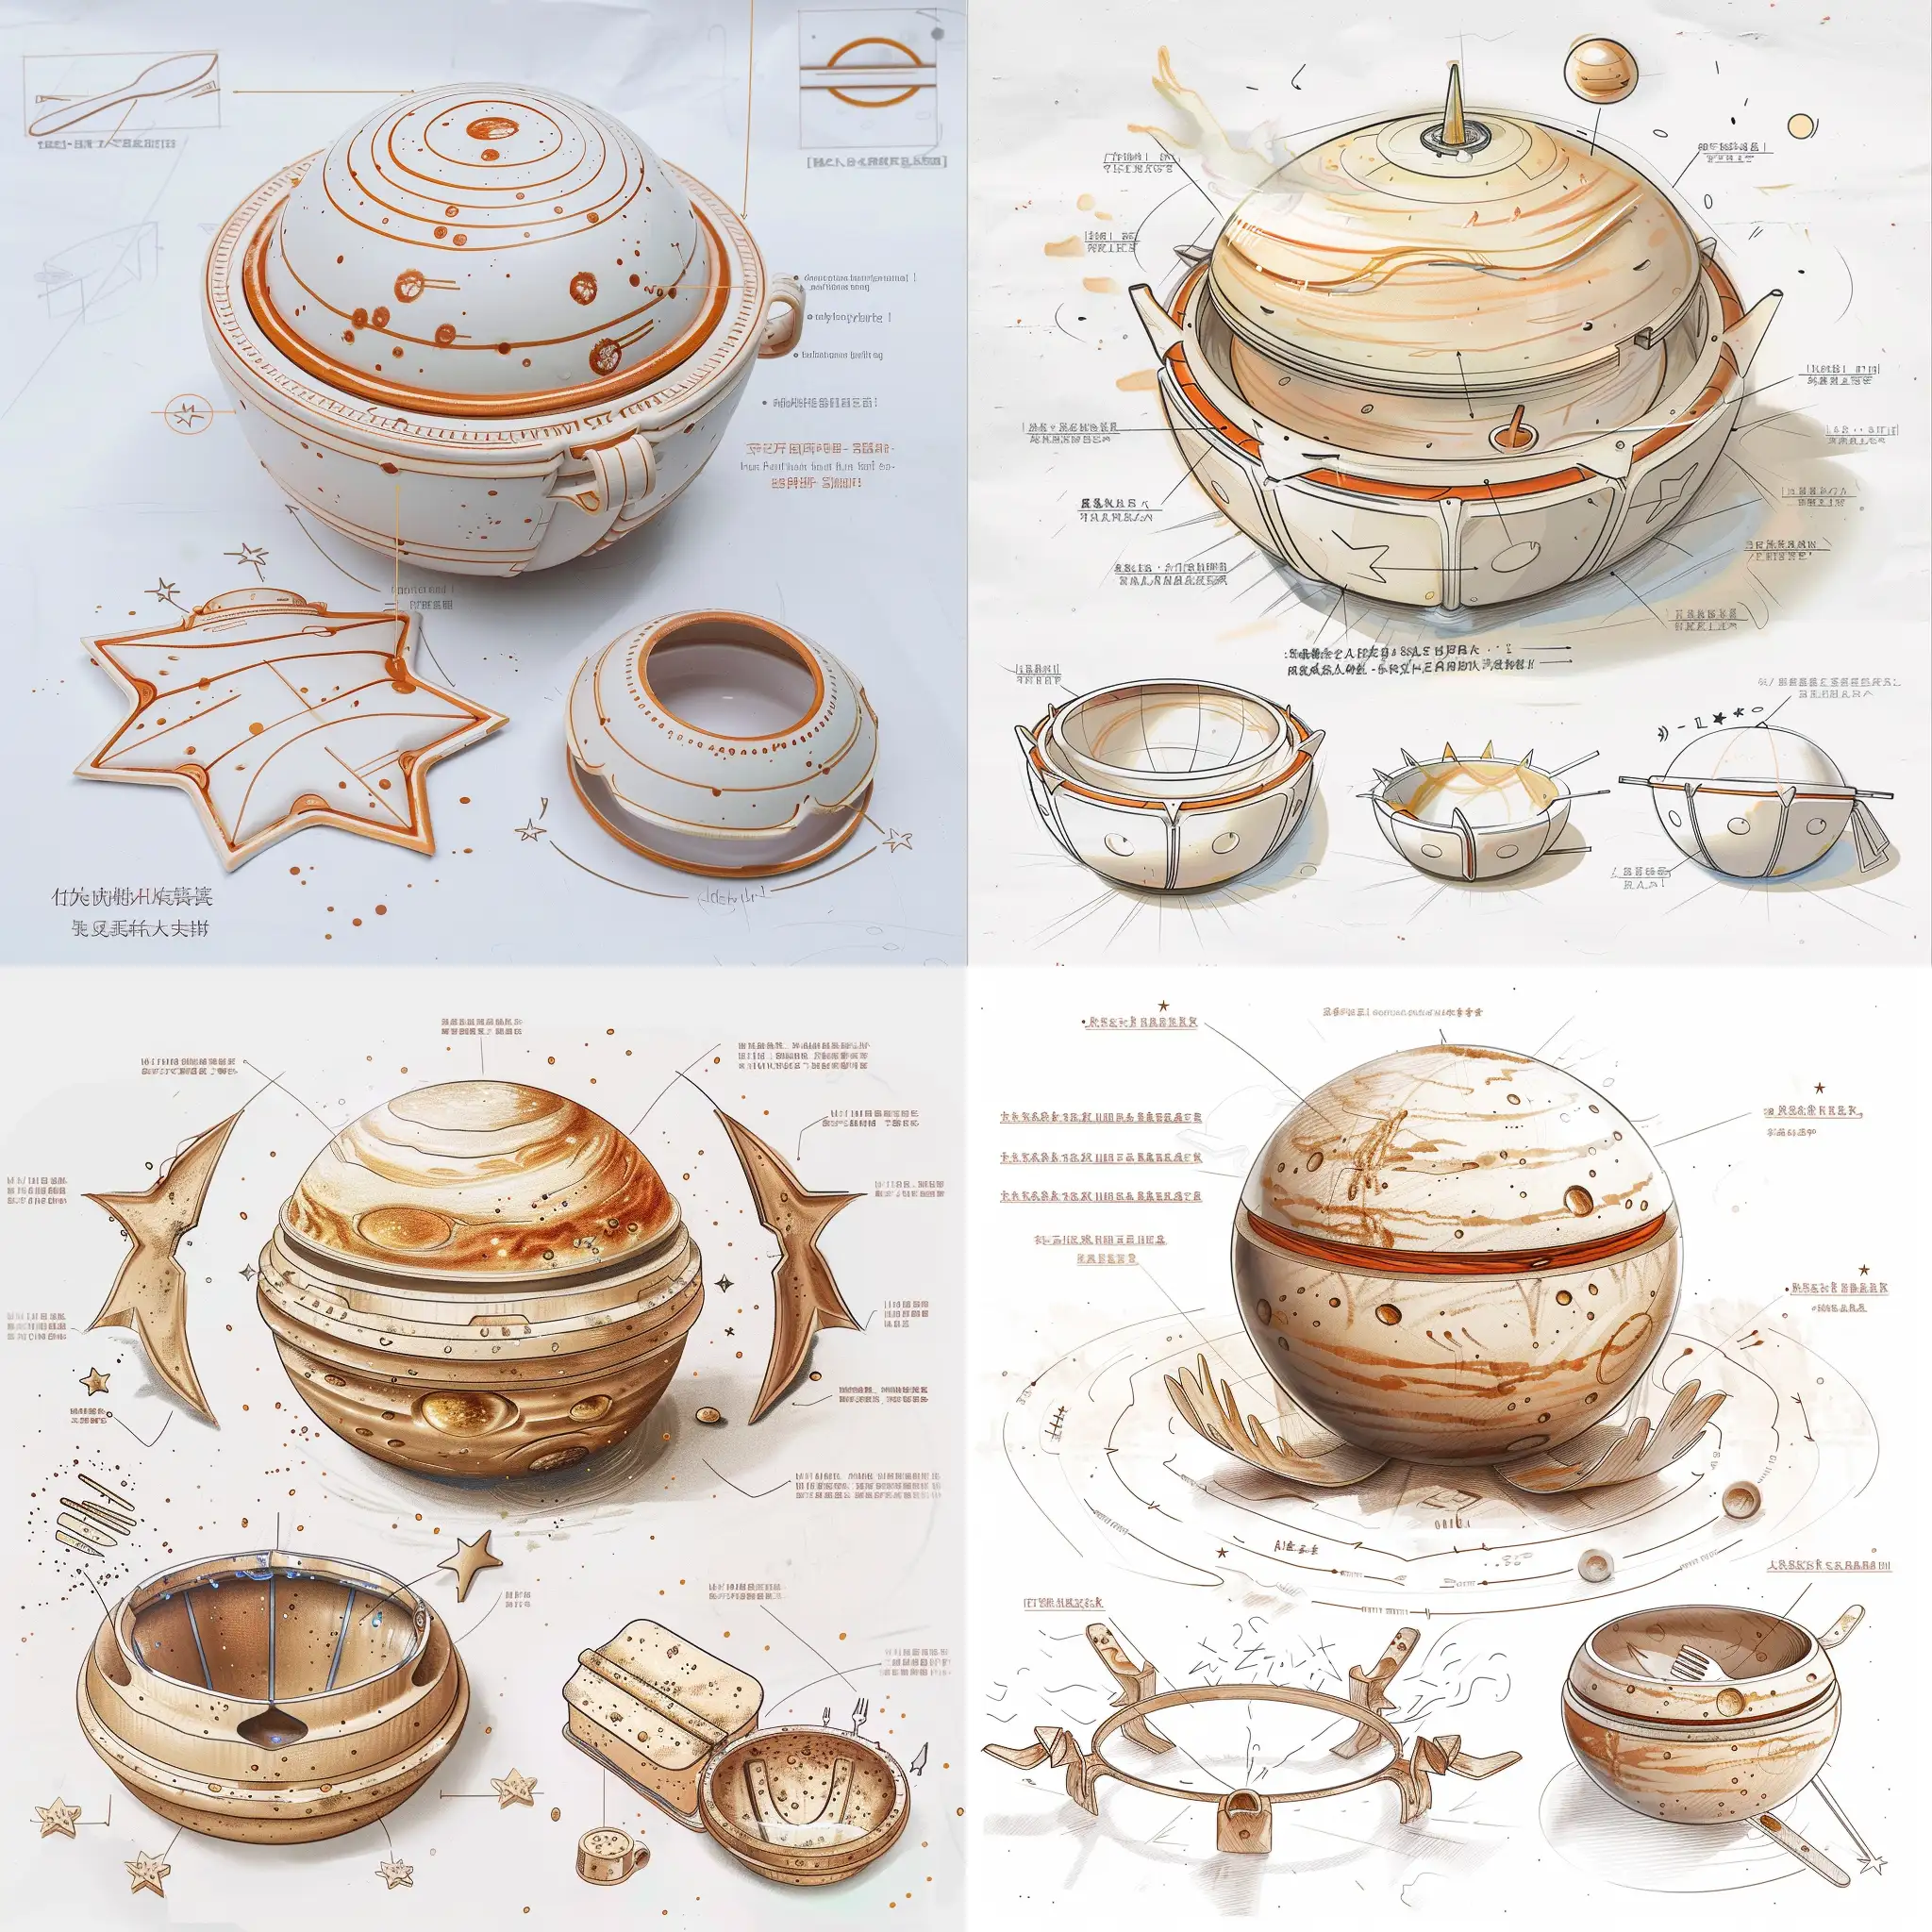 Childrens-Thermal-Preservation-Bowl-Design-Sketch-Portable-and-Cute-Waterflood-Bowl-with-Planet-and-Star-Decoration